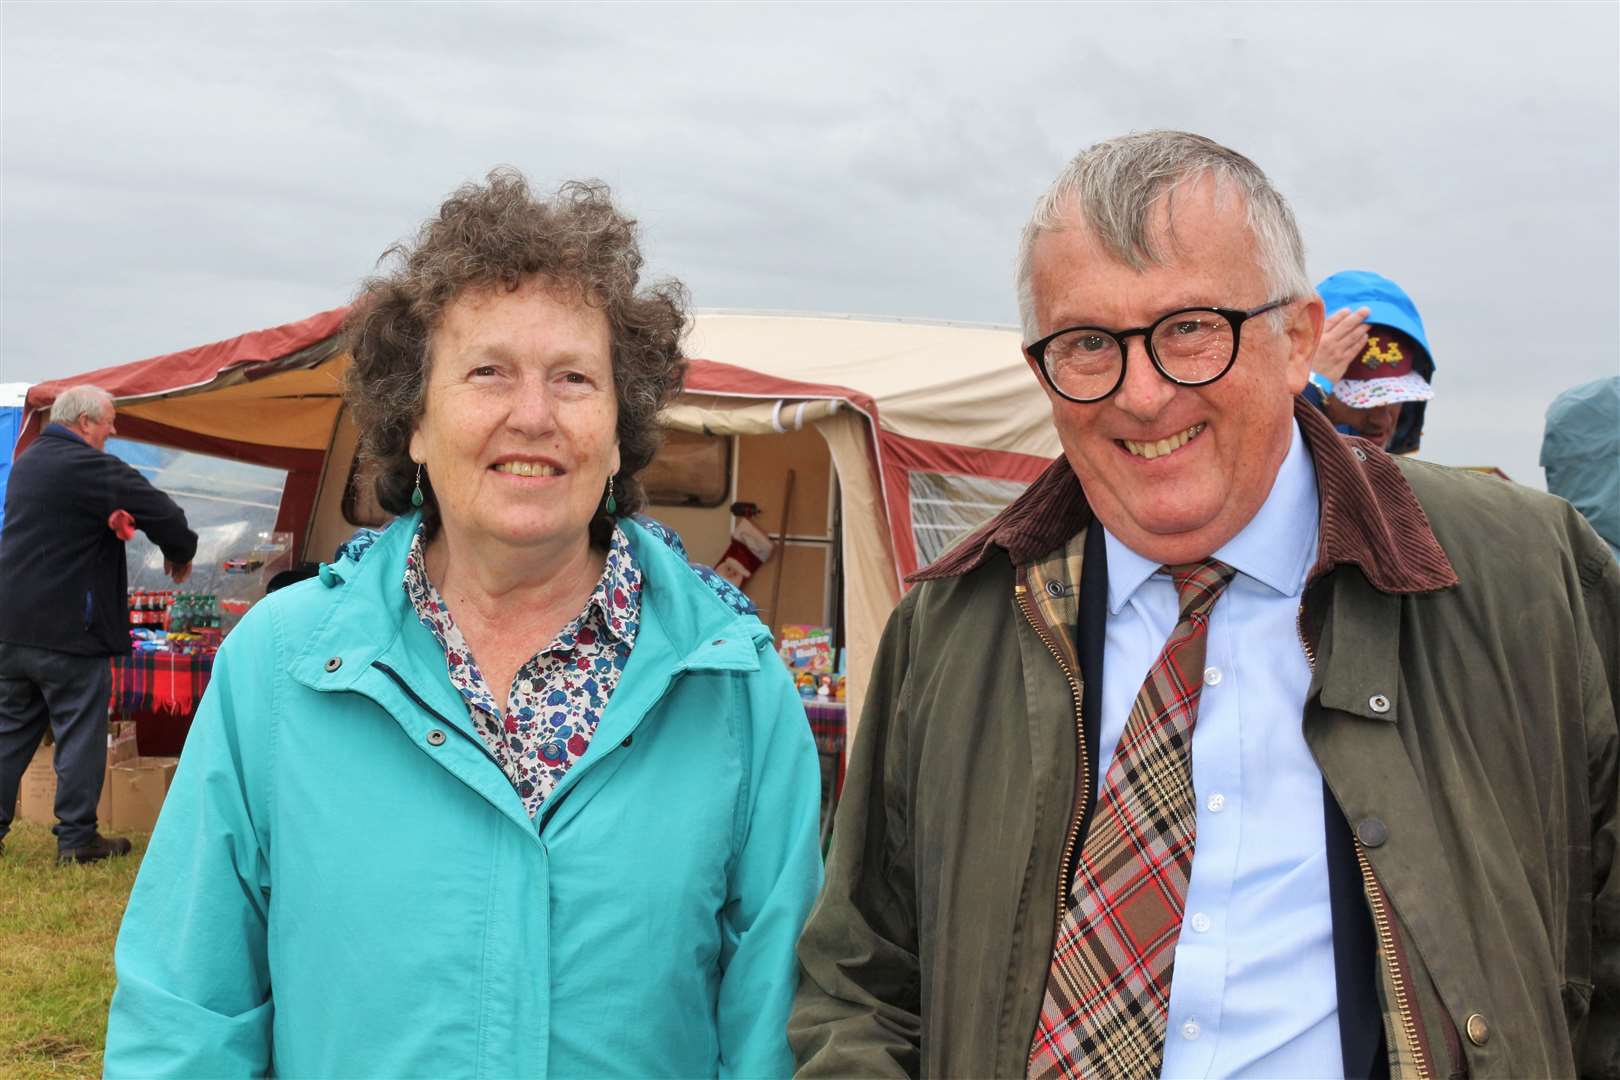 Jamie Stone MP with his wife Flora at the Mey Games. Picture: Eswyl Fell